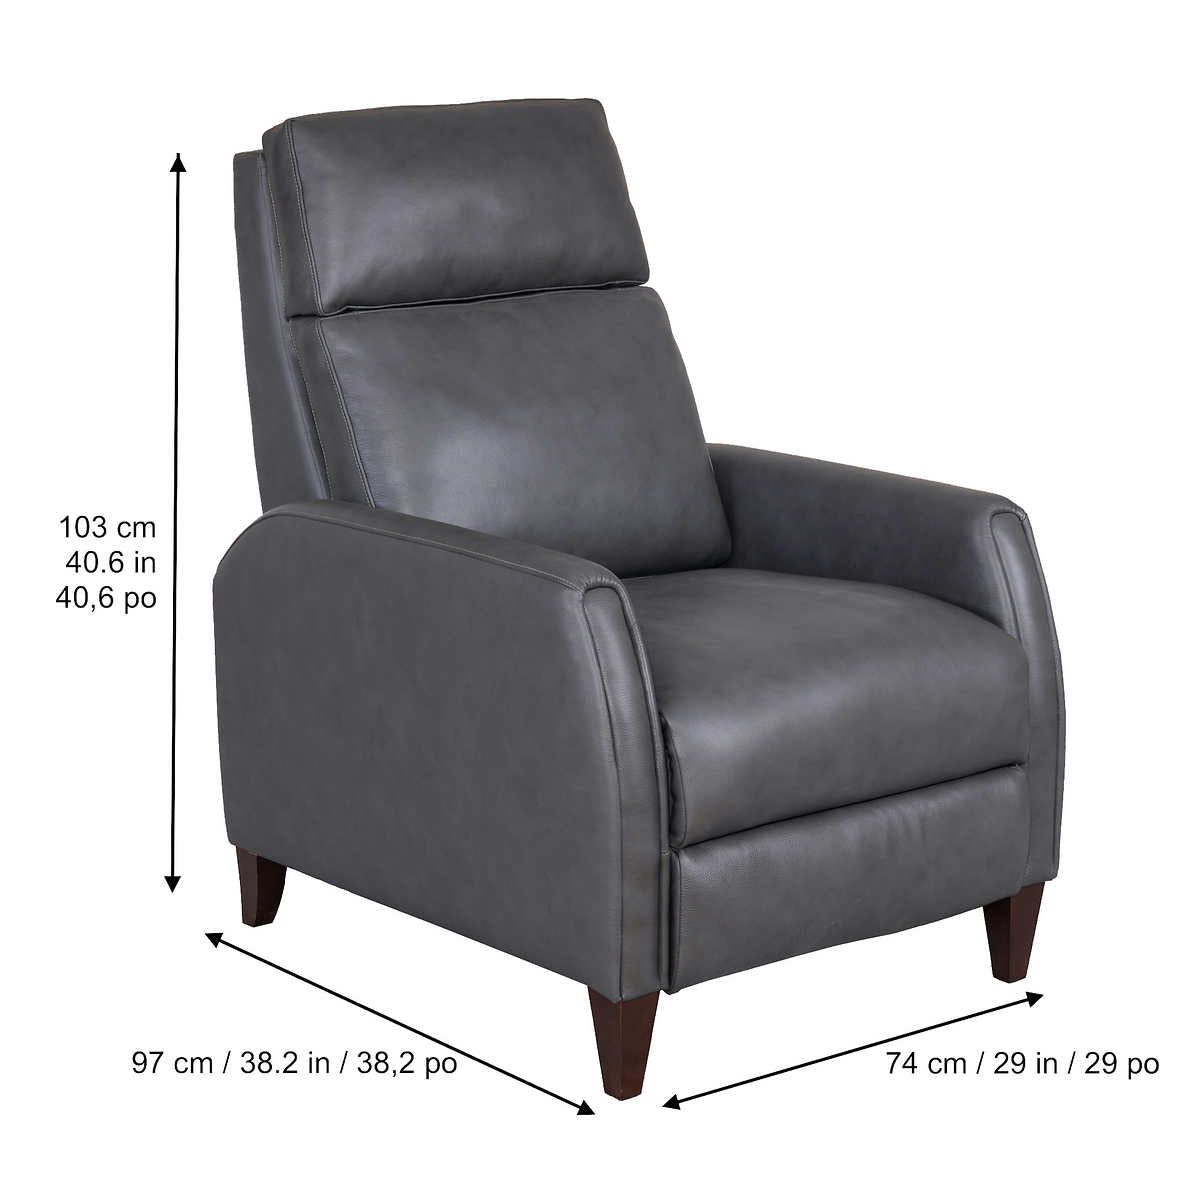 Costco - Decklyn Leather Pushback Recliner - Retail $599